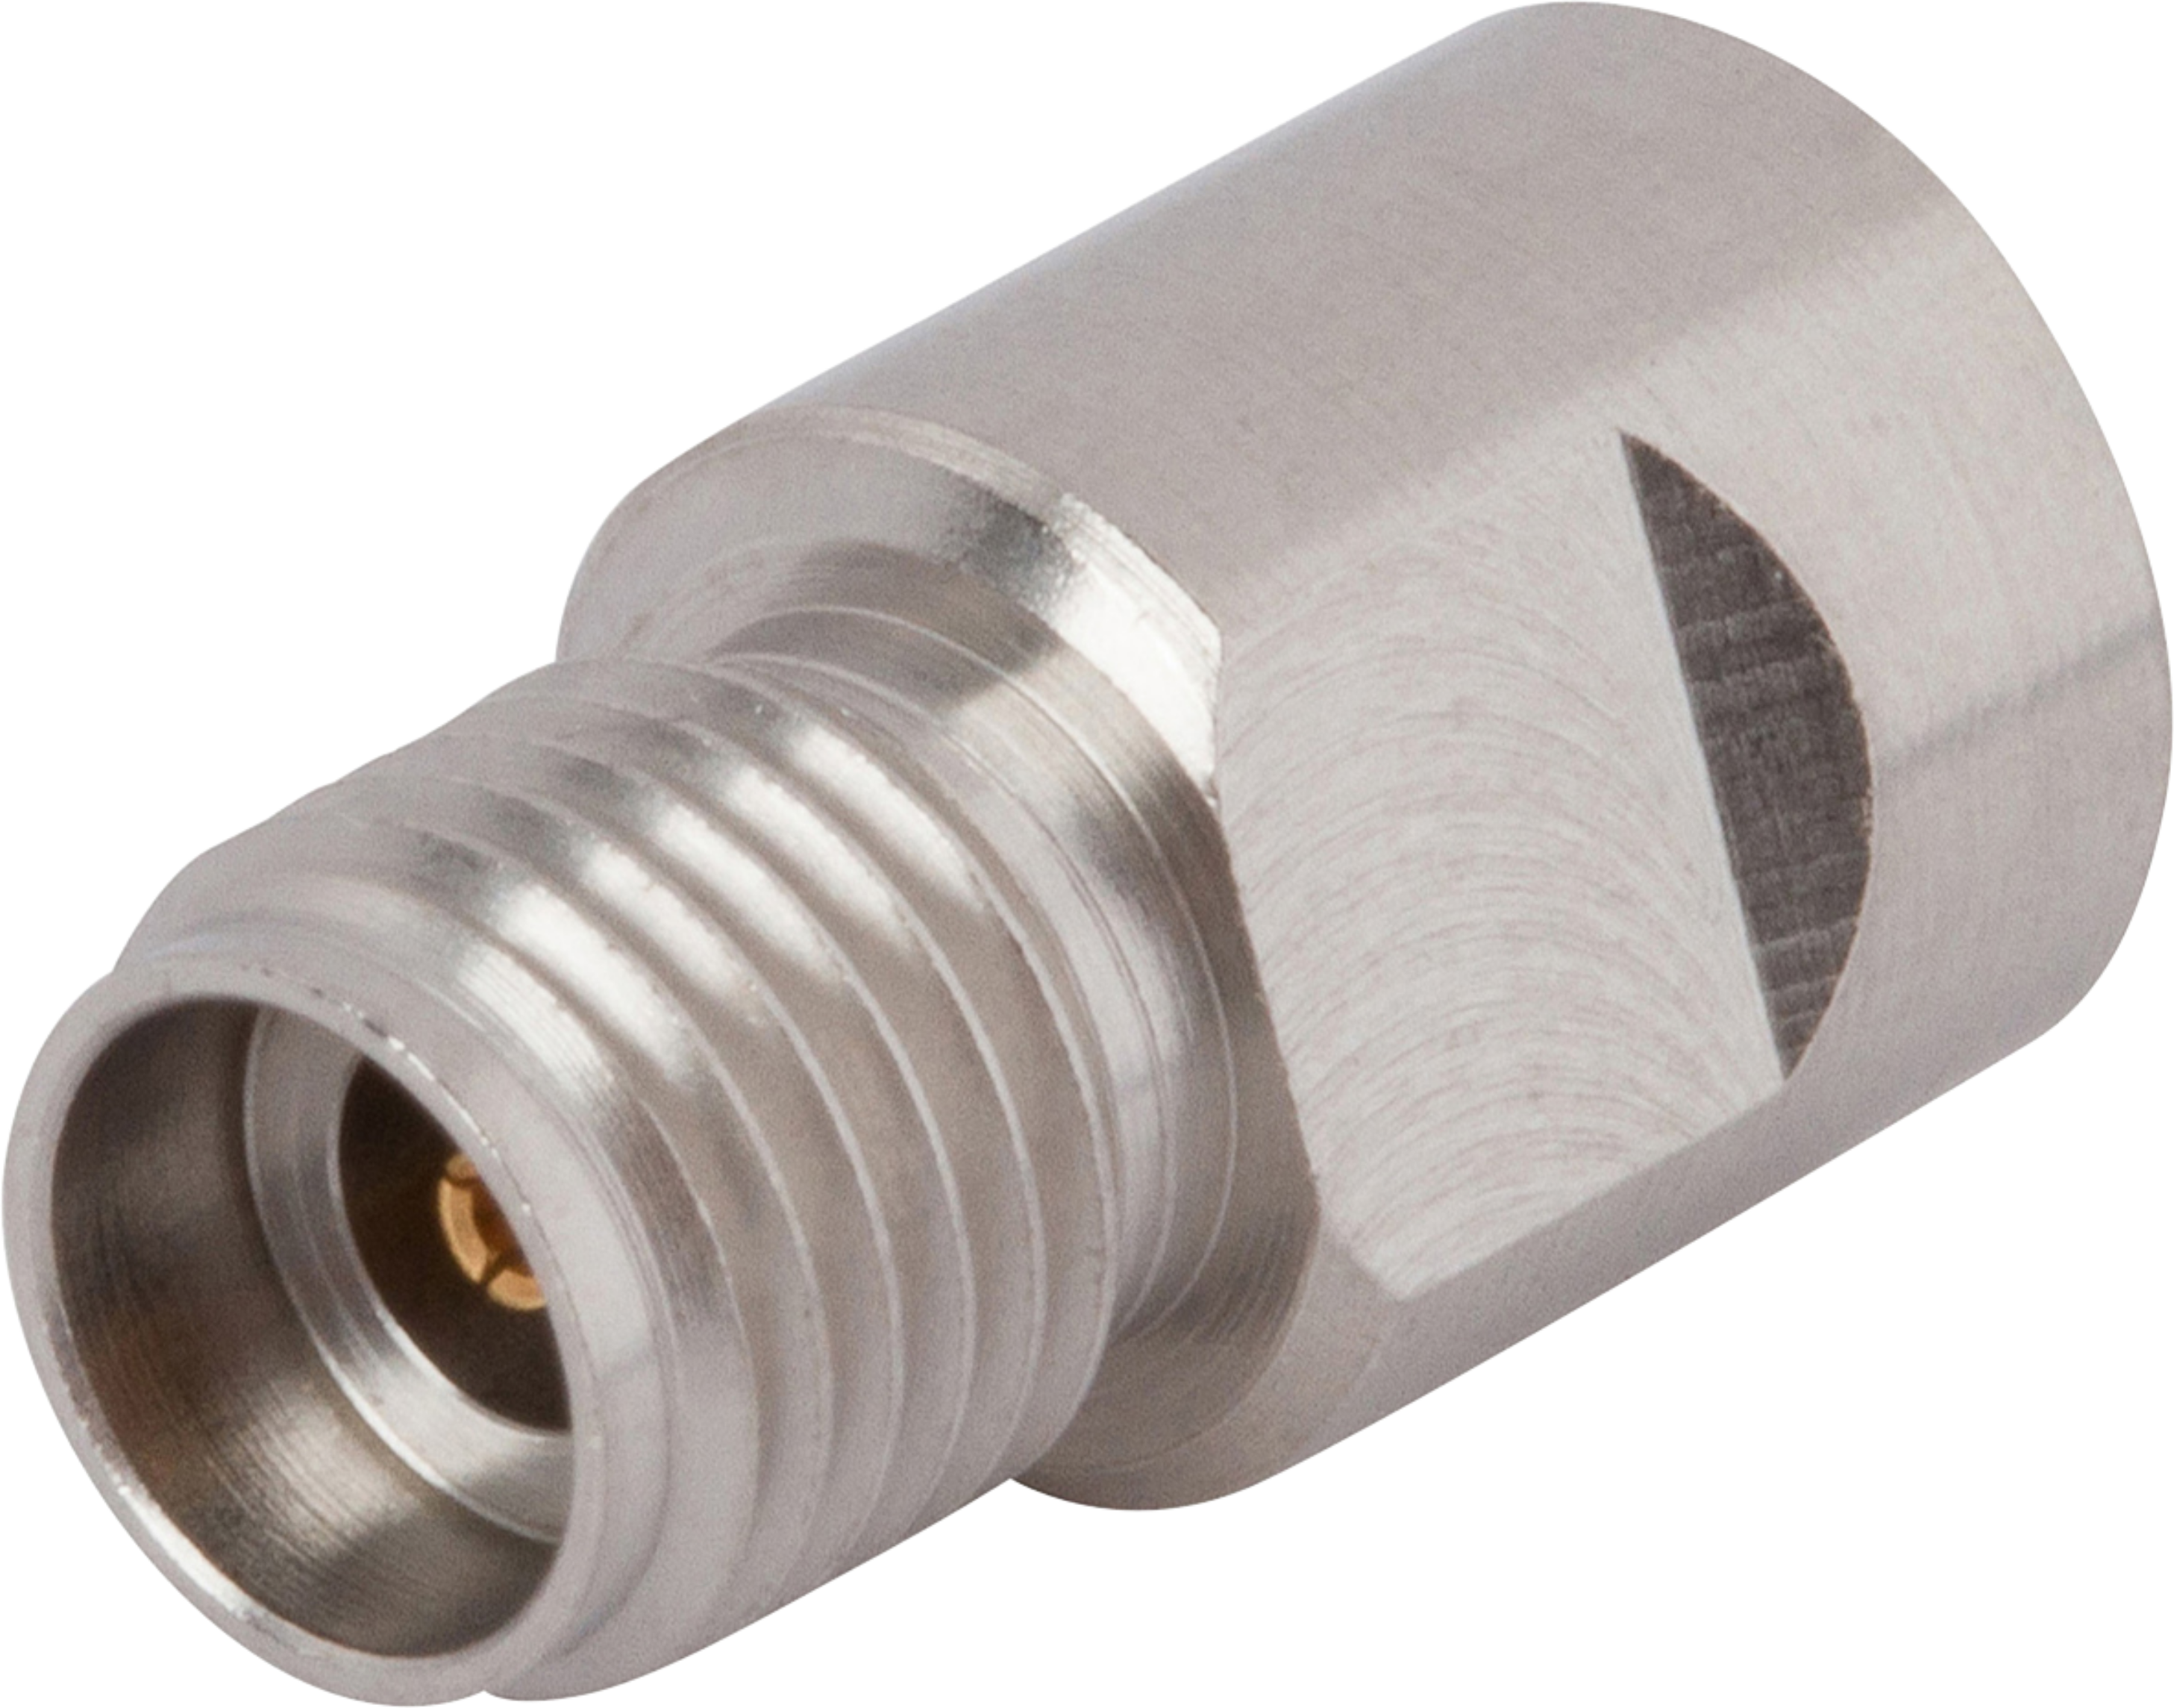 SMPS Female to 2.92mm Female Adapter, 1138-6009